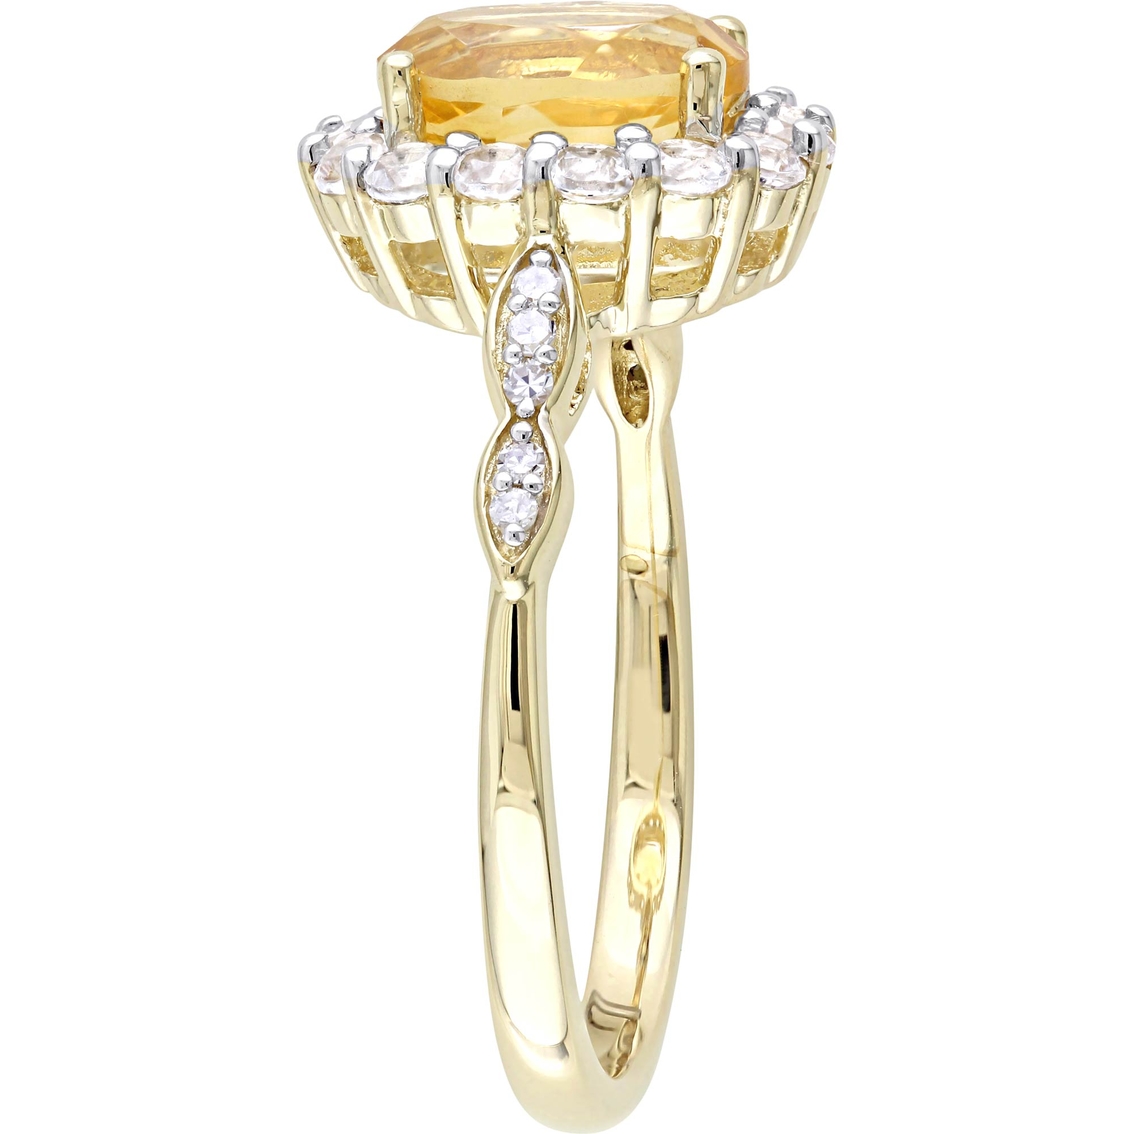 Sofia B. 14K Yellow Gold Citrine and White Topaz and Diamond Accent Halo Ring - Image 2 of 4